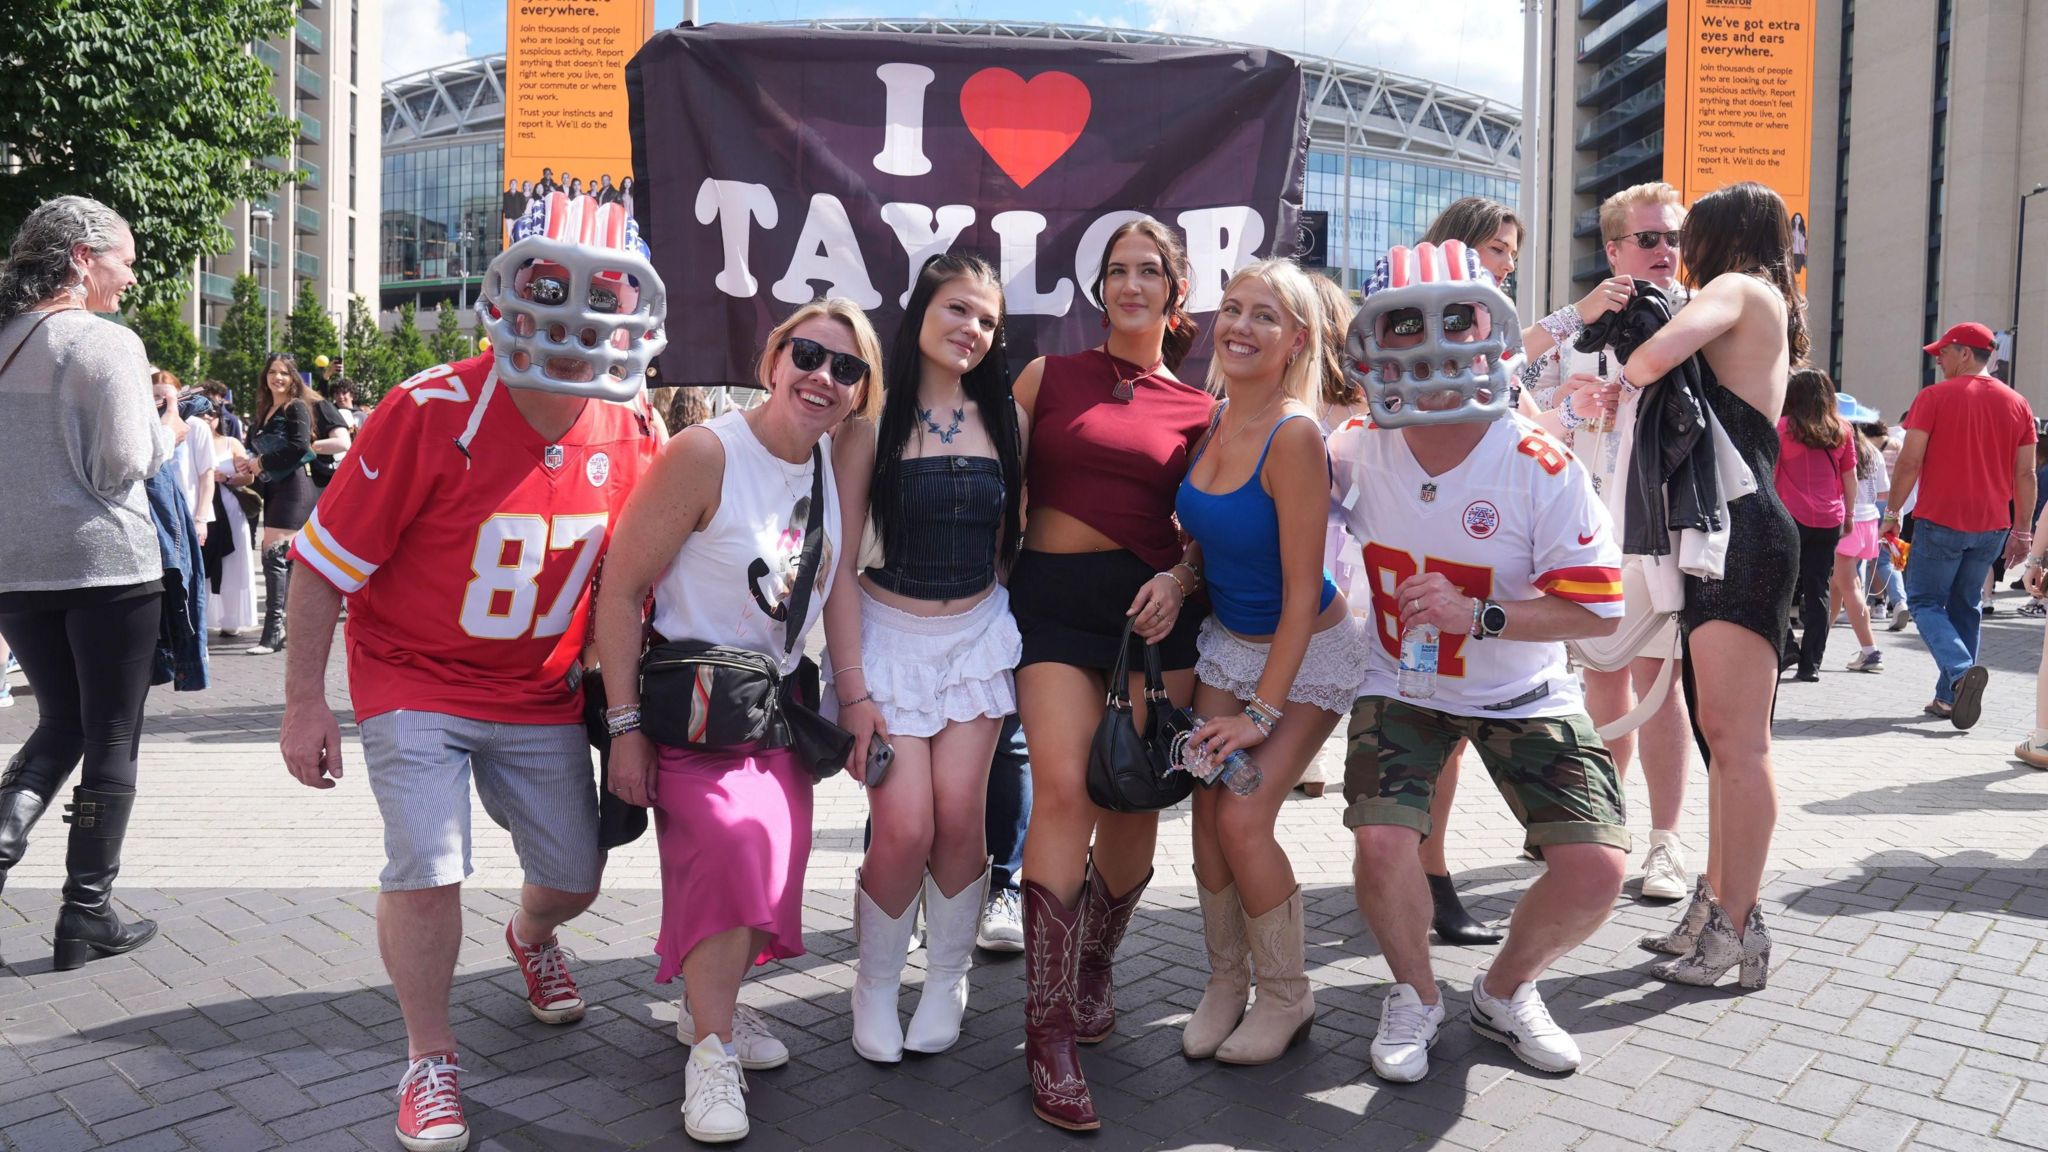 Fans in cowboy boots and American football costumes outside Wembley, with a banner that says I Love Taylor above them